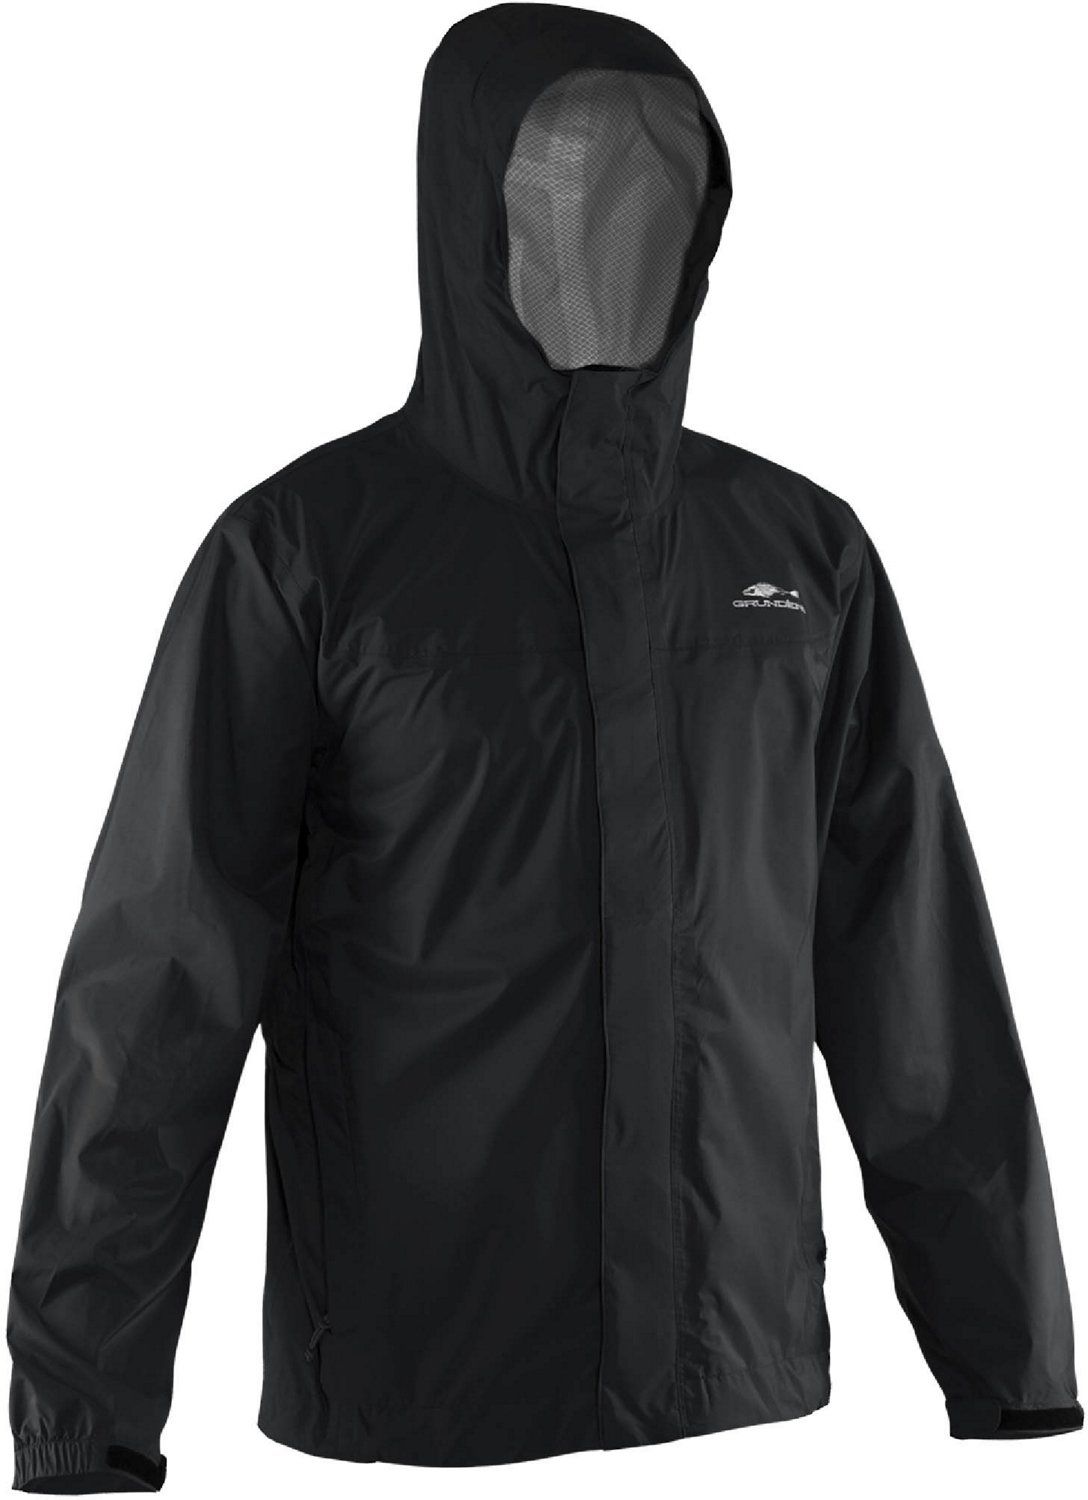 Grundens Men's Storm Runner Jacket | Free Shipping at Academy